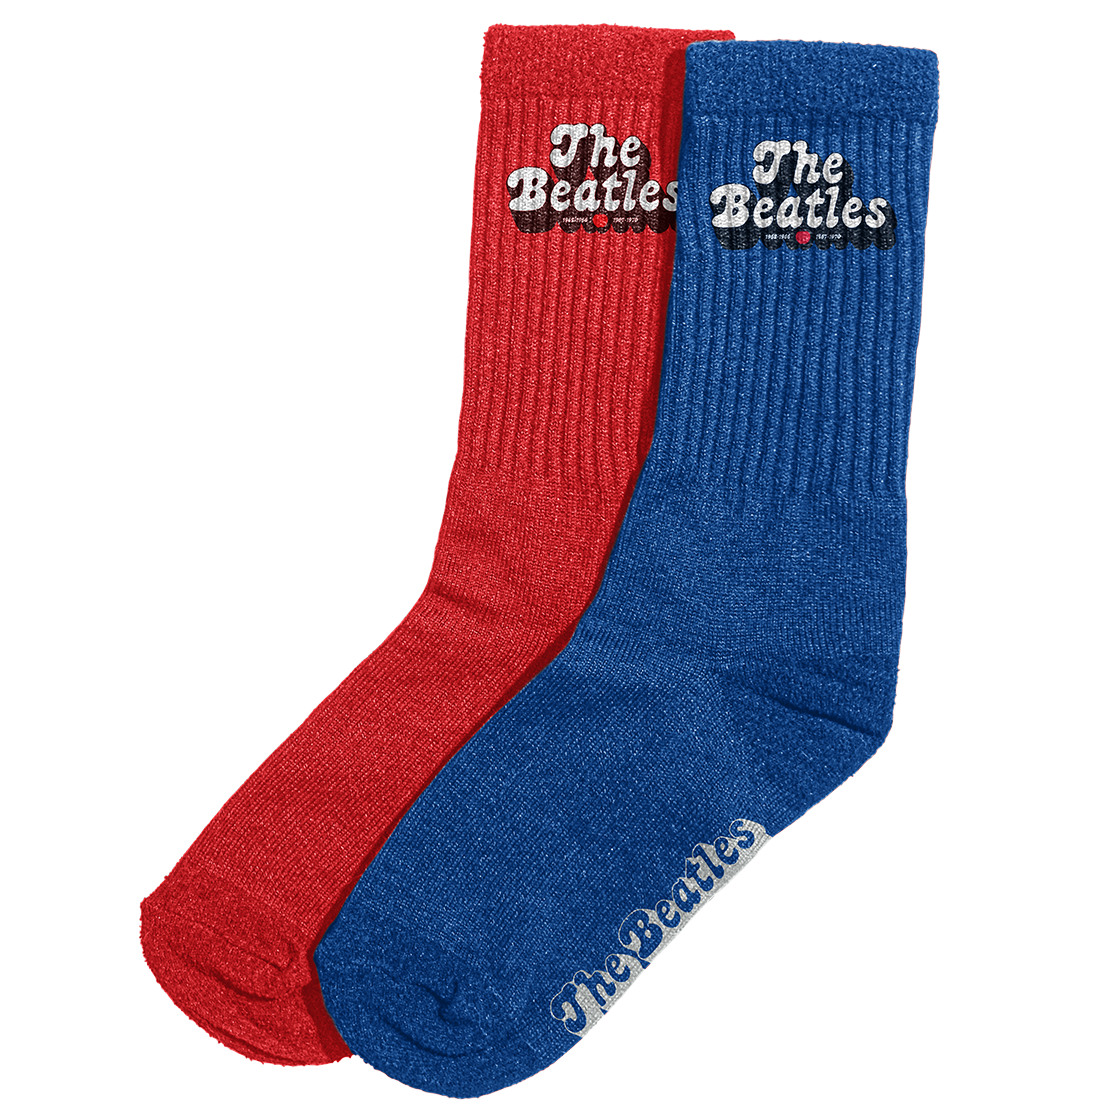 The Beatles - Red and Blue Socks